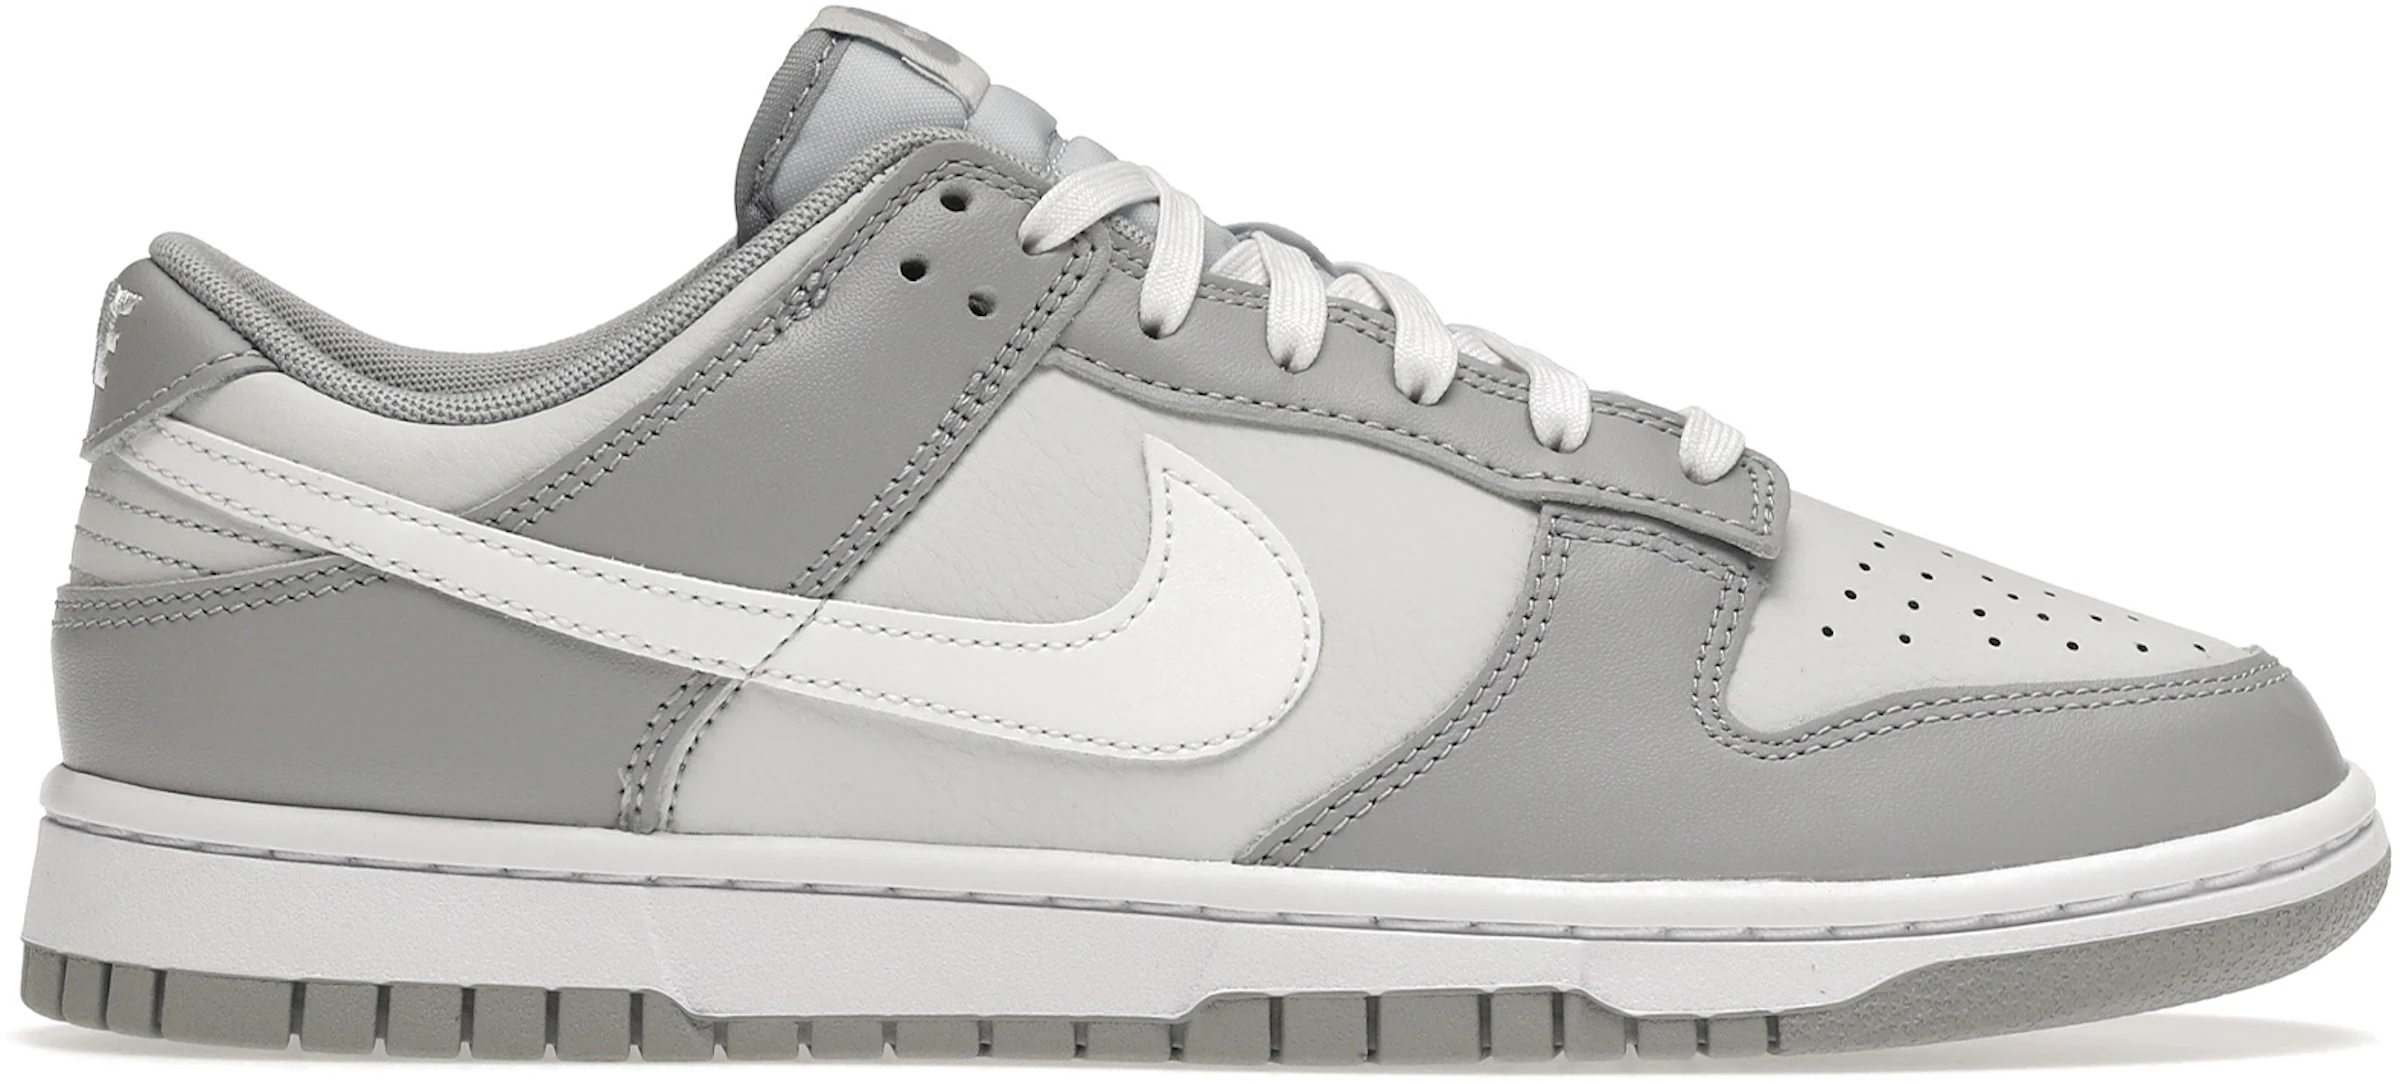 Nike Dunk Low Two Tone Grey: Sleek And Sophisticated Sneakers In Two ...